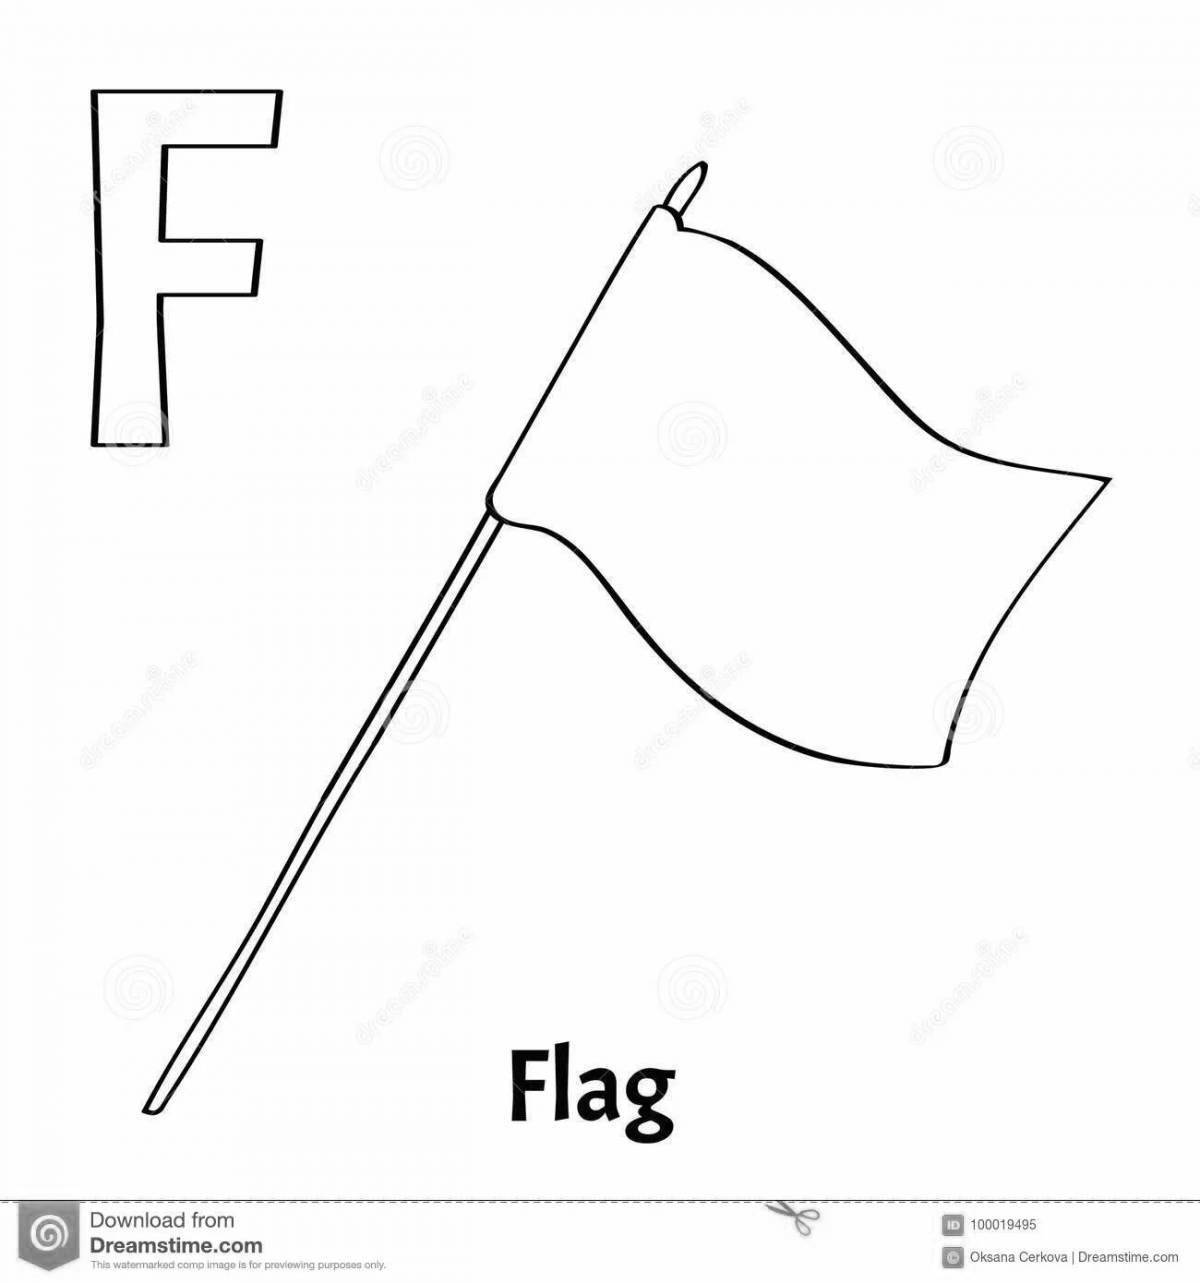 Fat flag coloring book for kids